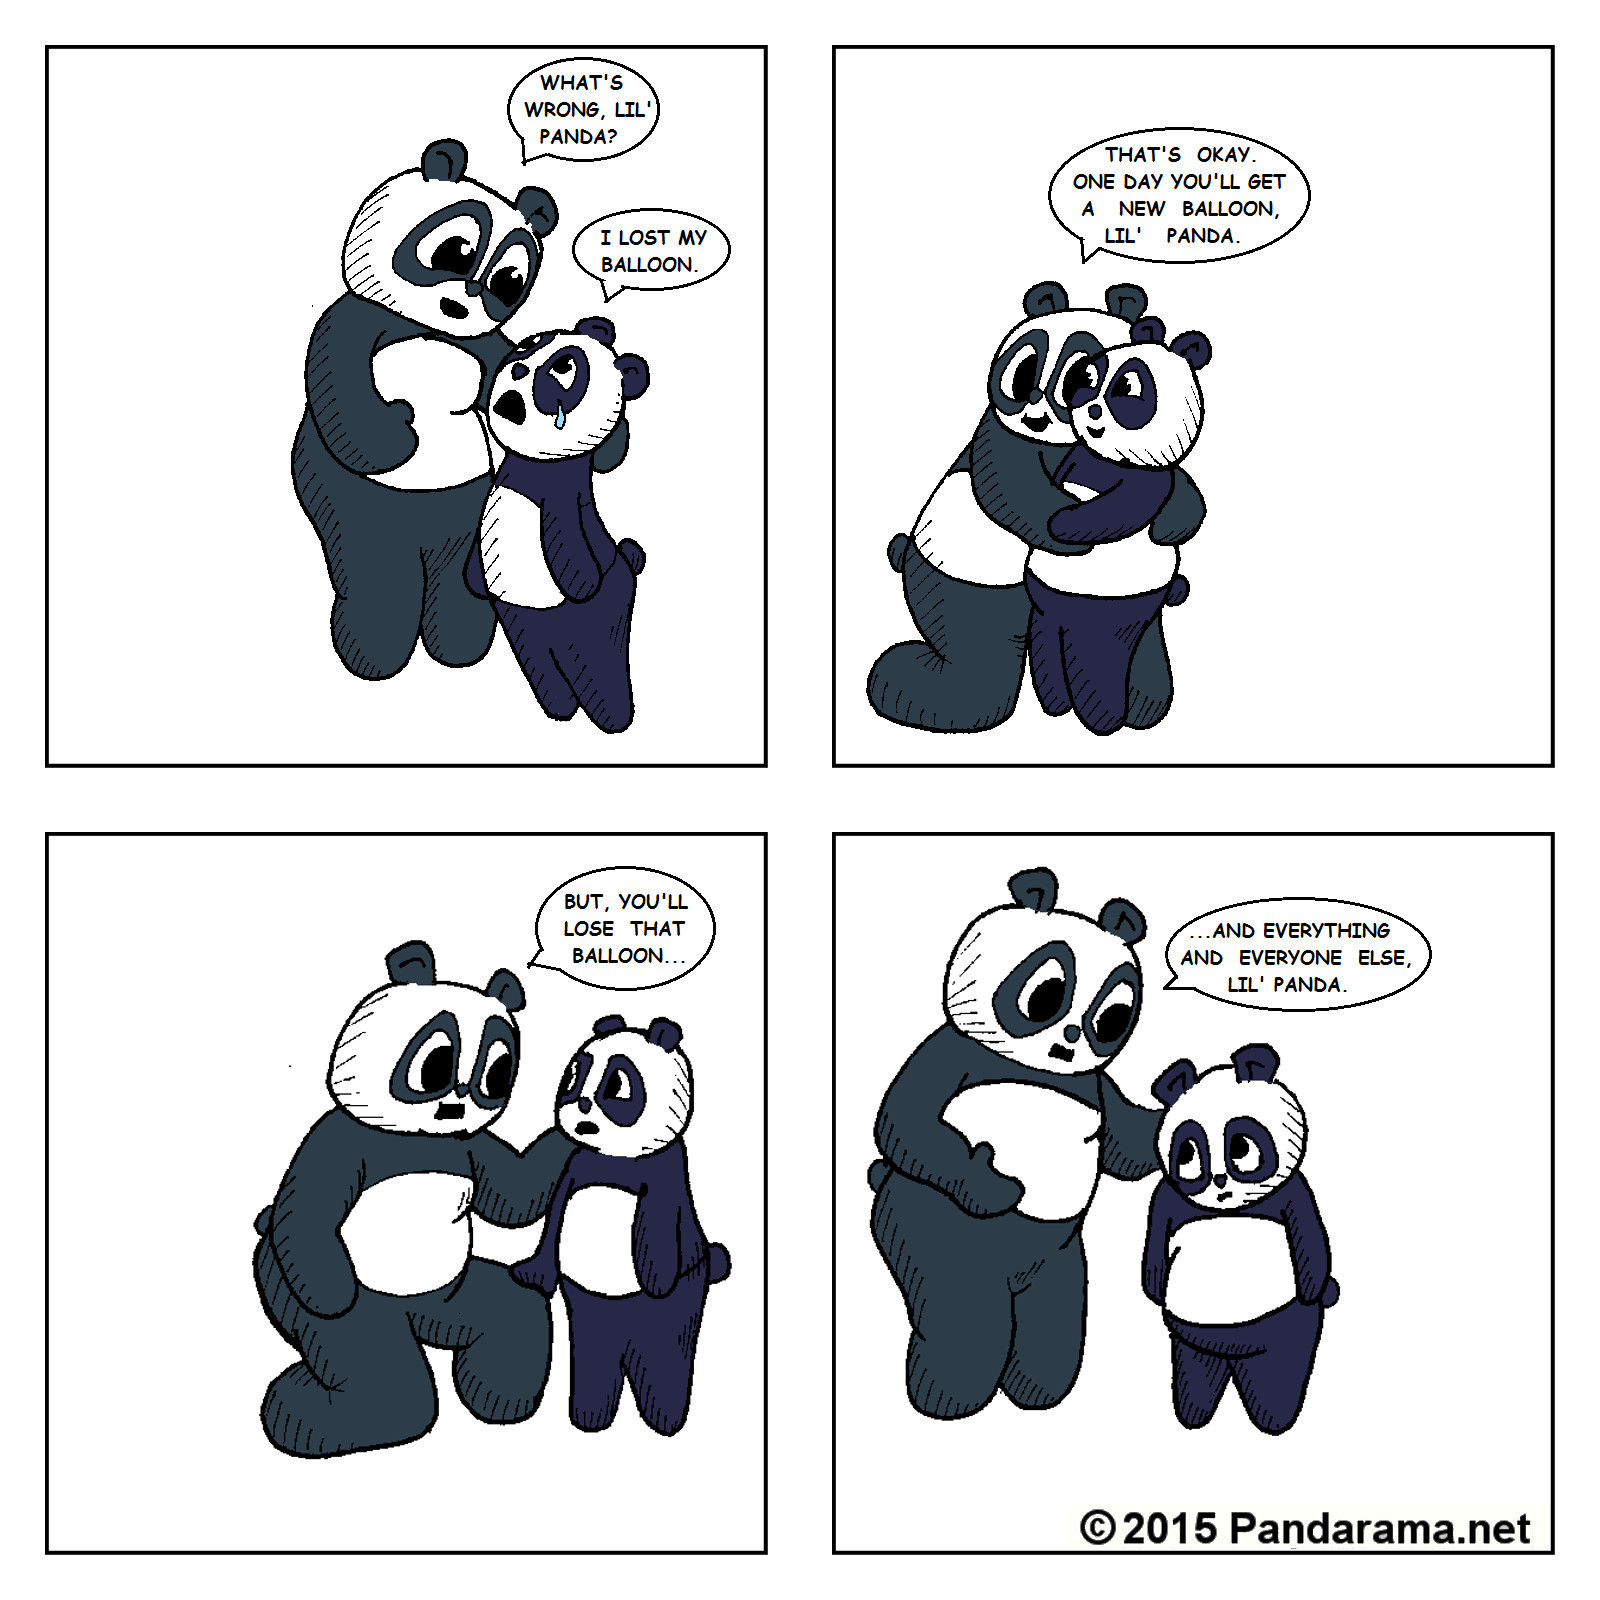 Pandarama.net Pandarama cartoon of a little panda tells the big panda that he is sad because he lost his balloon. The big panda explians that he will get a new balloon, then lose it and everything and everyone else.